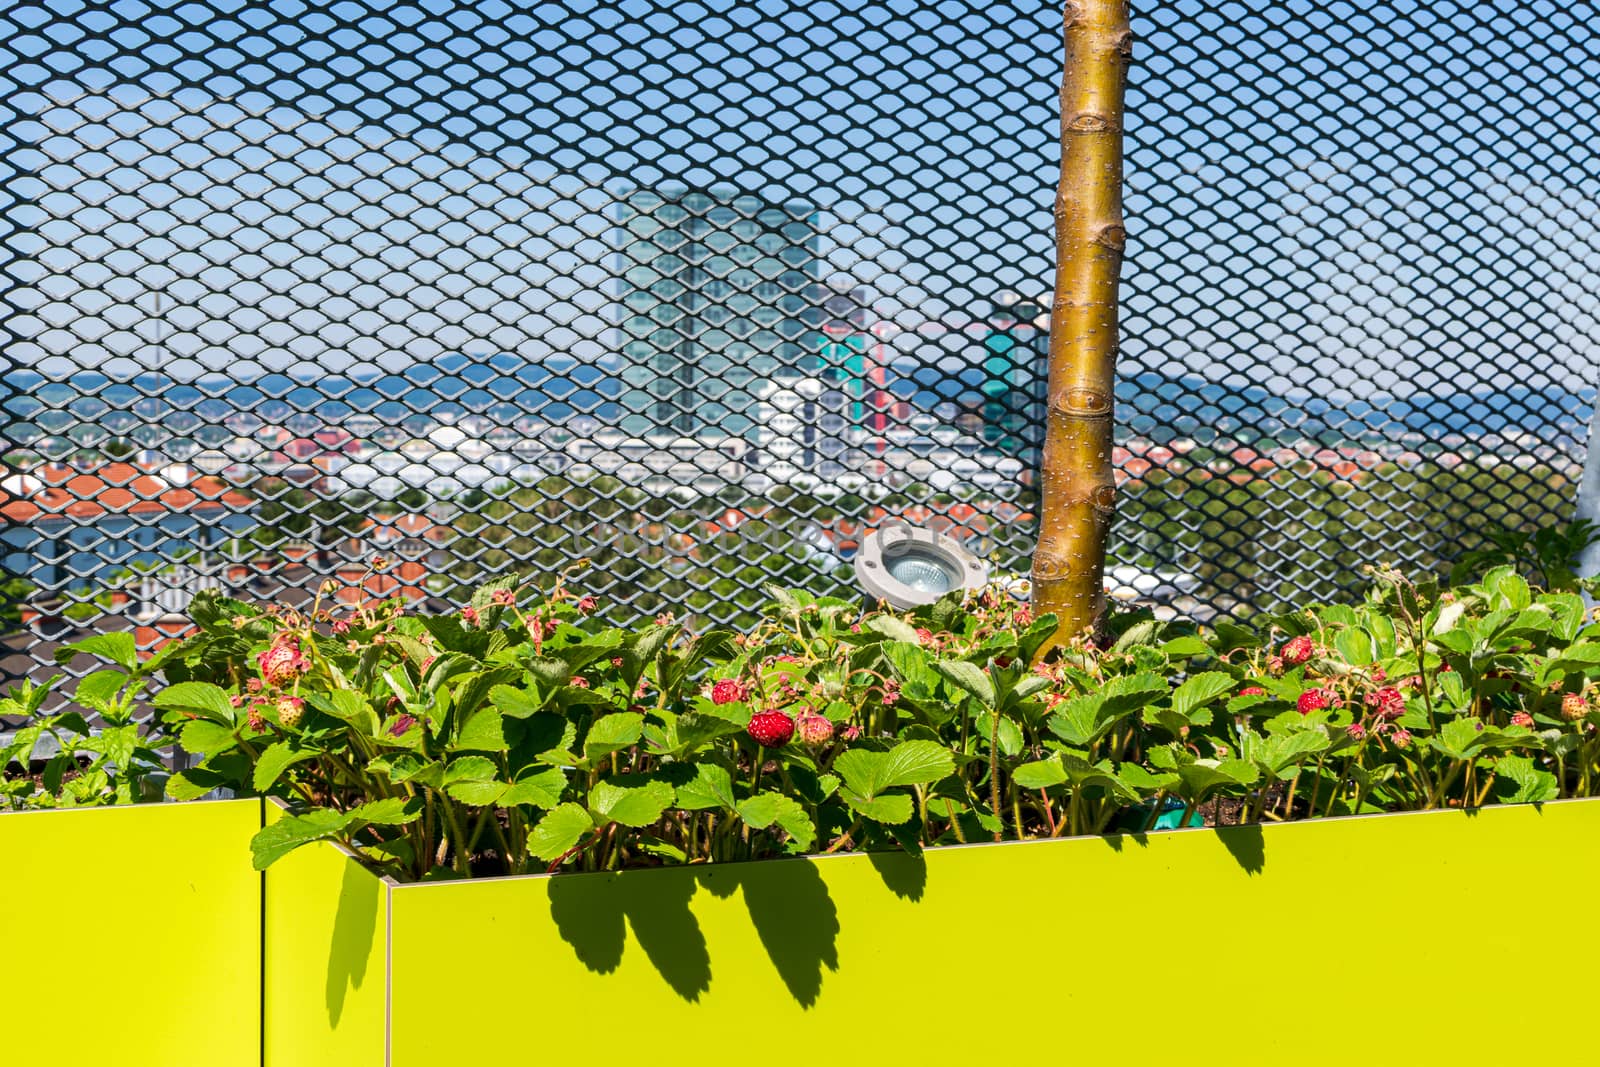 Green planter with an apple tree and strawberries with fruits in front of an expanded metal fence and high-rise buildings in the background